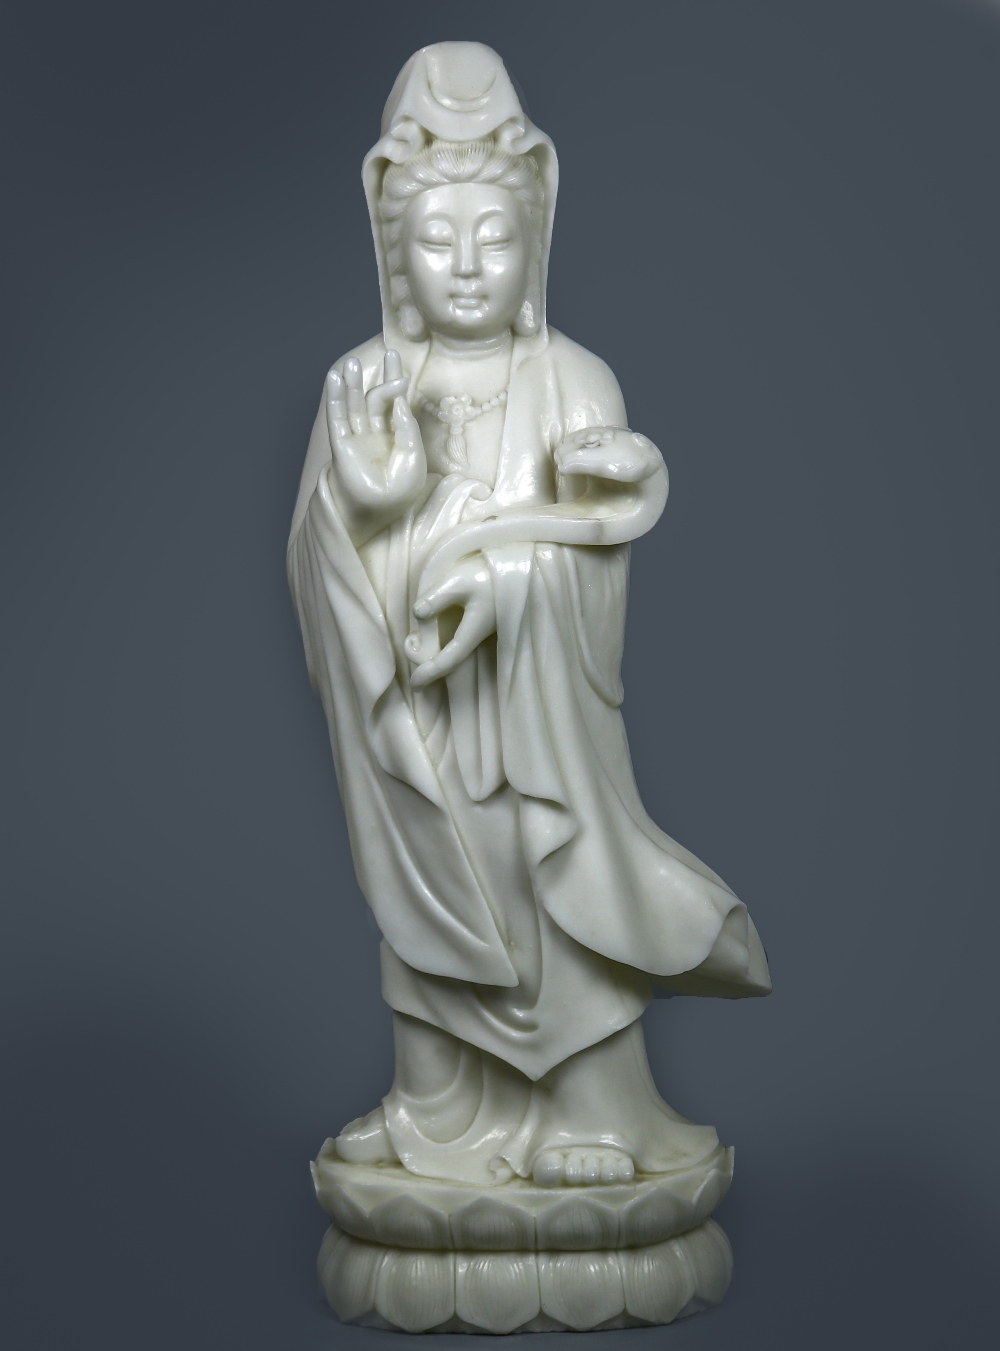 Chinese large stone sculpture of Guanyin, the standing bodhisattva holding a ruyi scepter, 39"h